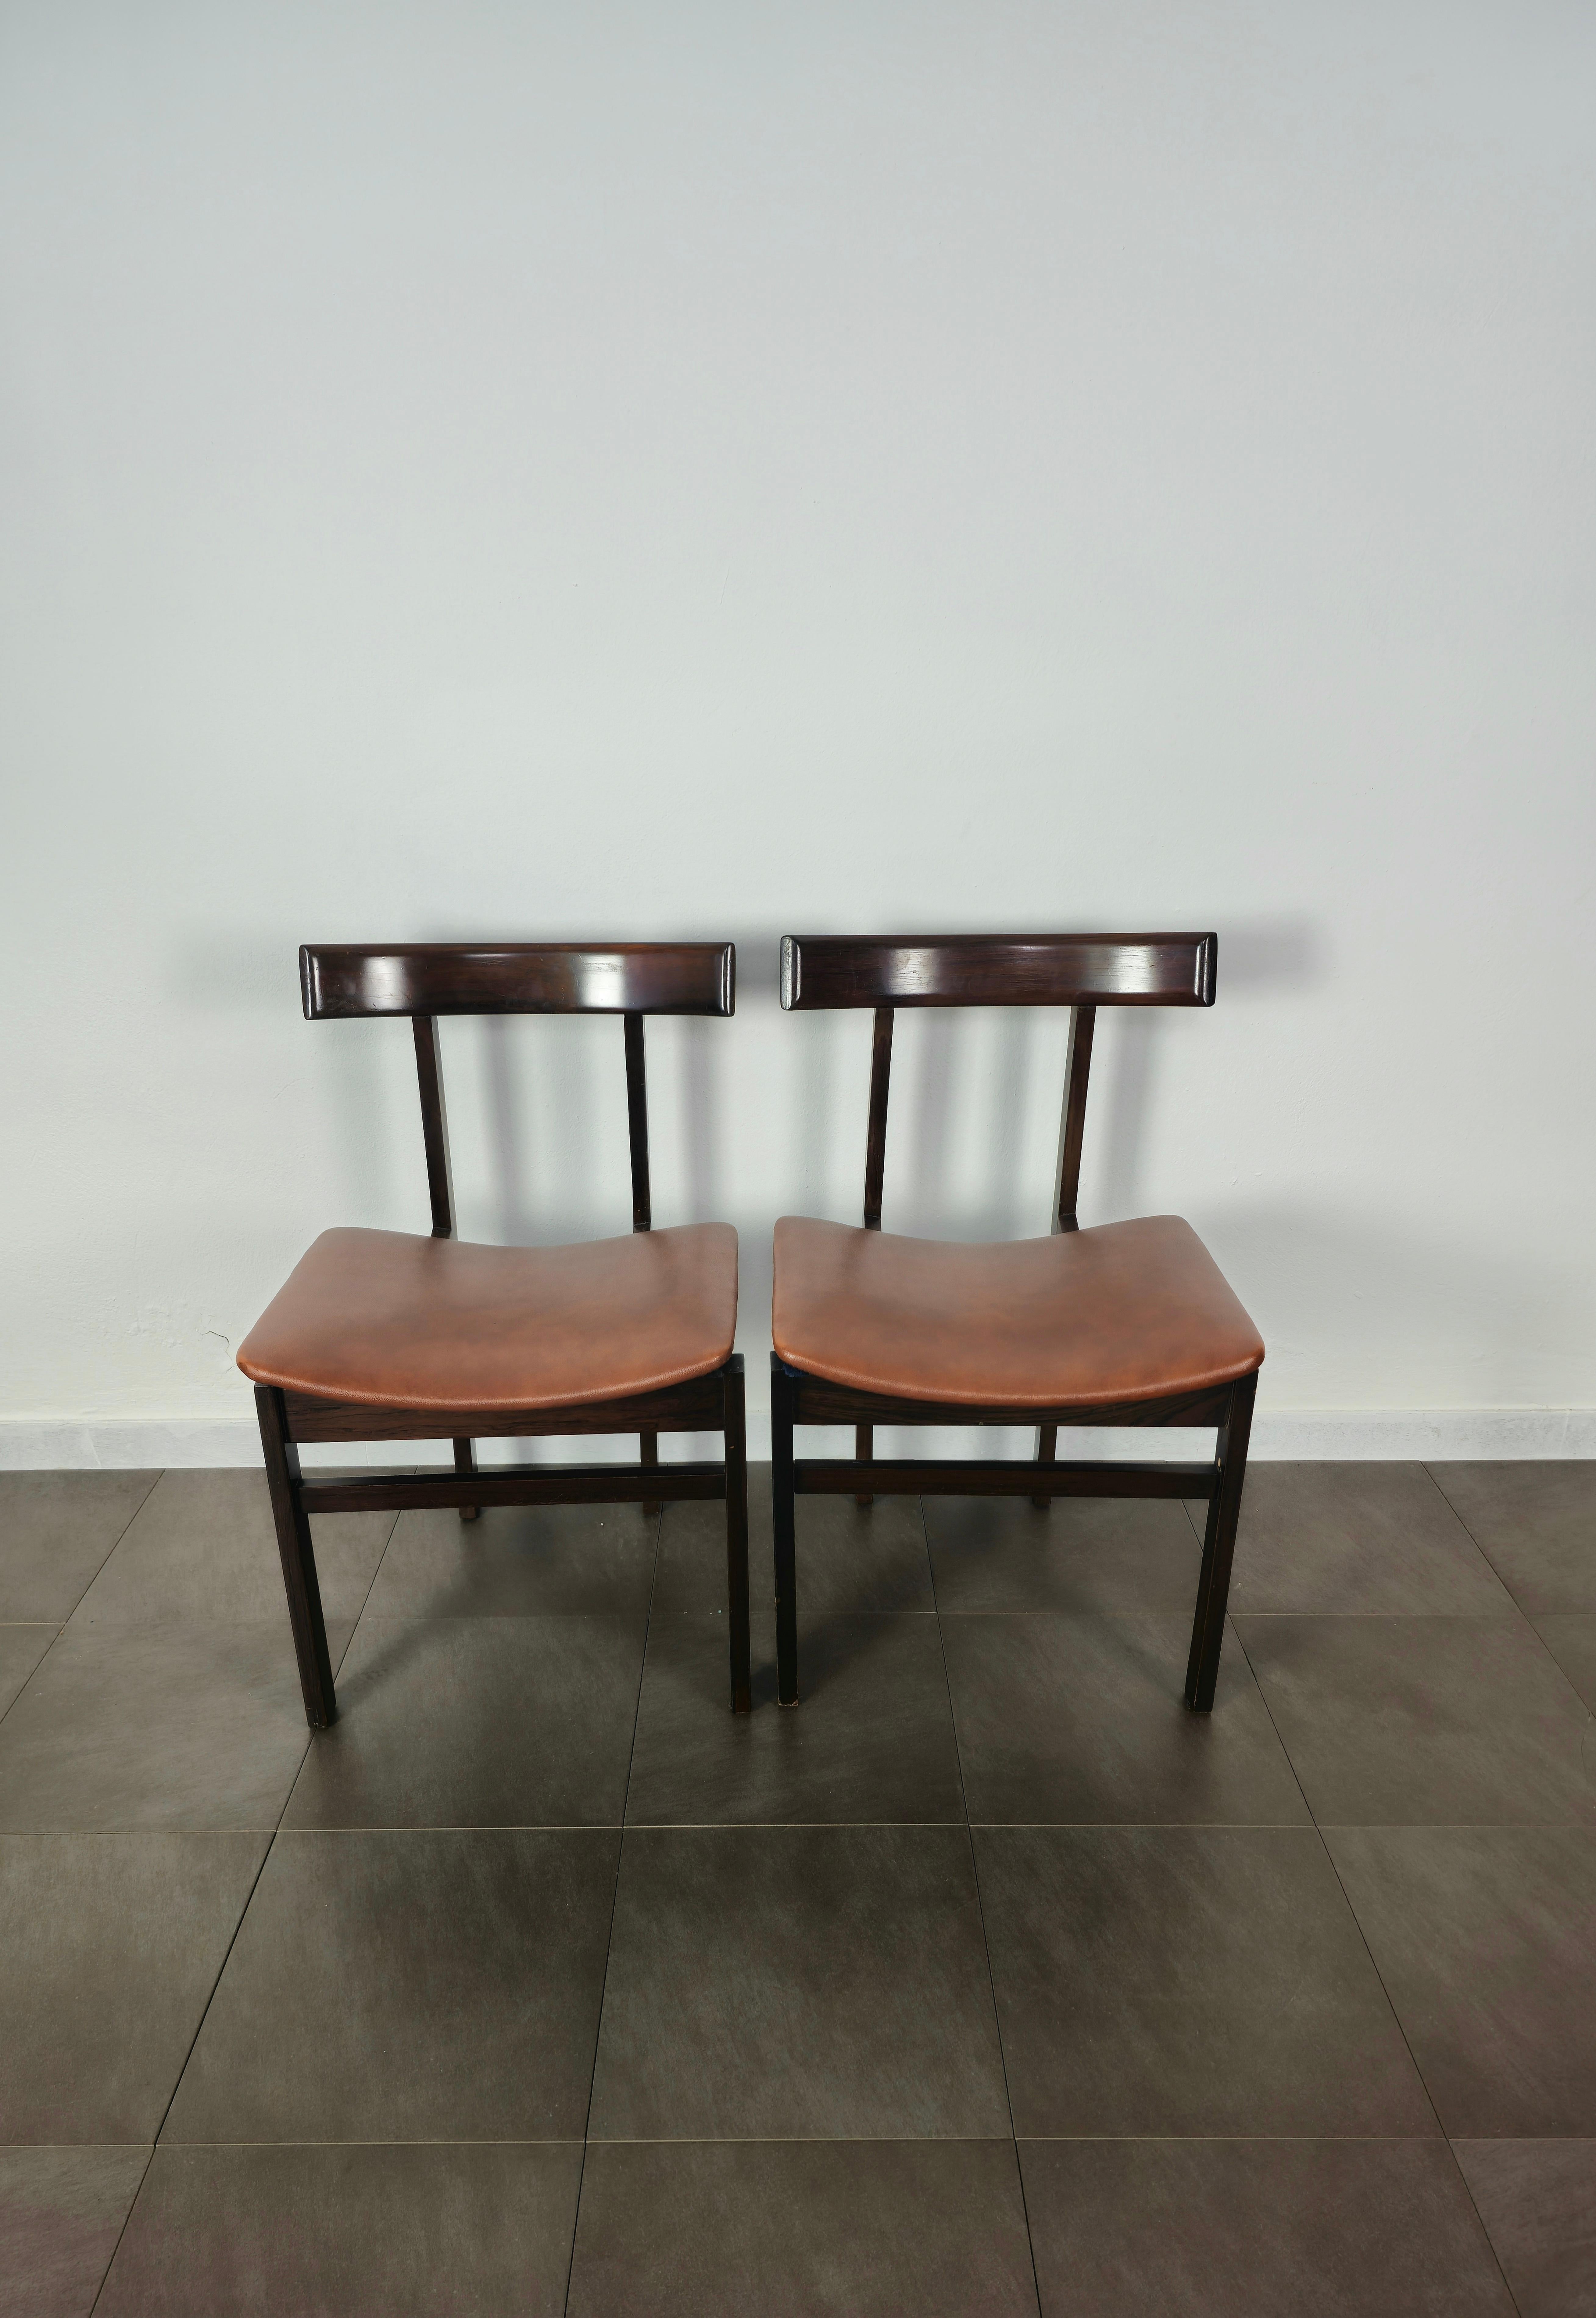 20th Century Dining Chairs Curved Wood Leather Inger Klingenberg for France&Son Set of 6 60s